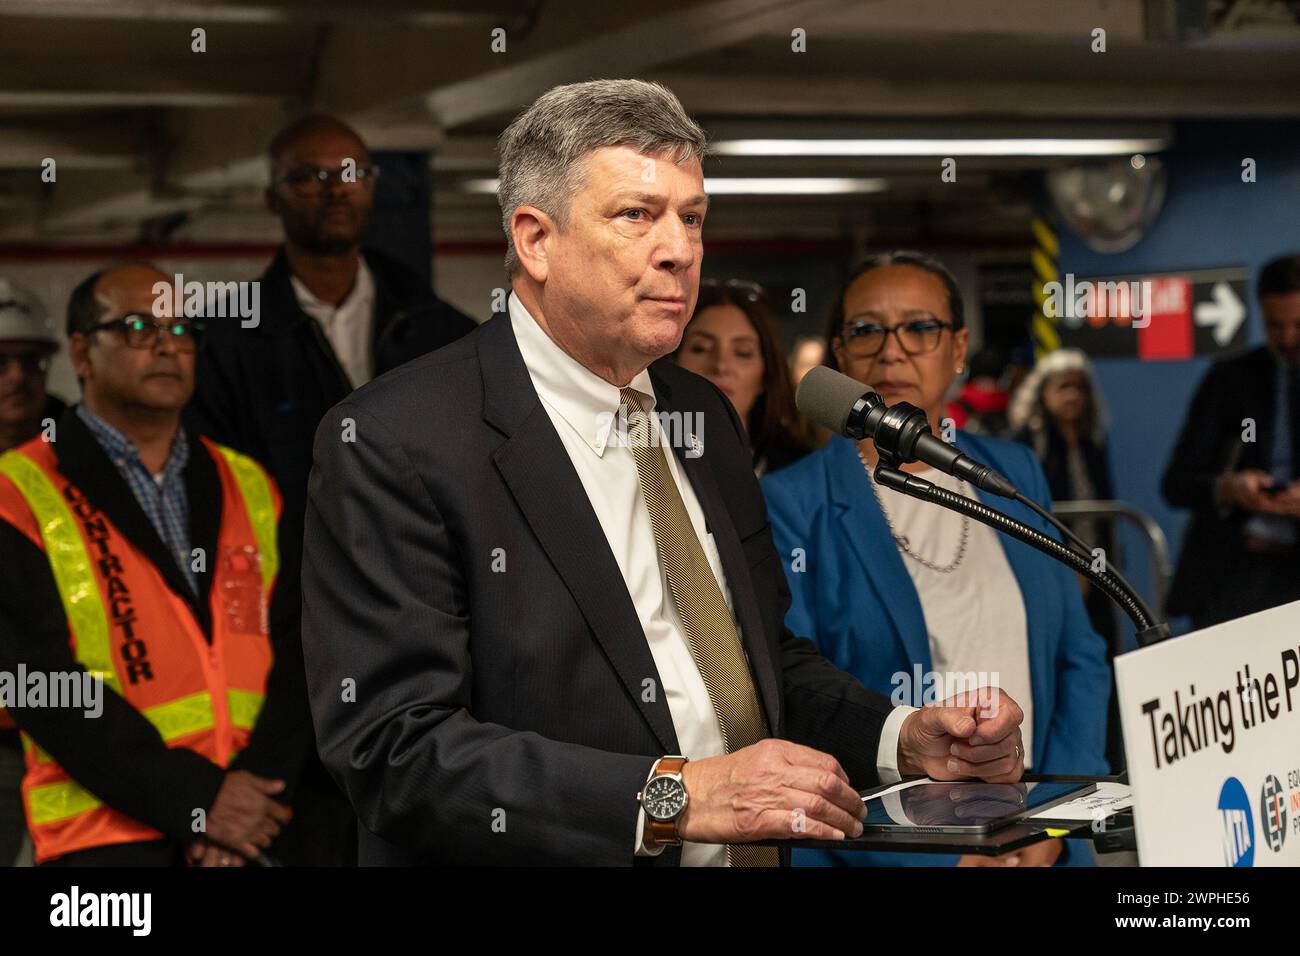 John Porcari, Equity in Infrastructure Project Co-Founder and Former U.S. Deputy Secretary of Transportation speaks during MTA announcement at 14th street subway station in New York. Dorval Carter Jr., Chicago Transit Authority President and Equity in Infrastructure Project Co-Chair, John Porcari, Equity in Infrastructure Project Co-Founder and Former U.S. Deputy Secretary of Transportation, Phillip Washington, Denver International Airport CEO and Equity in Infrastructure Project Chair, Janno Lieber, MTA Chair and CEO signed a pledge to promote minorities and women owned business to receive co Stock Photo